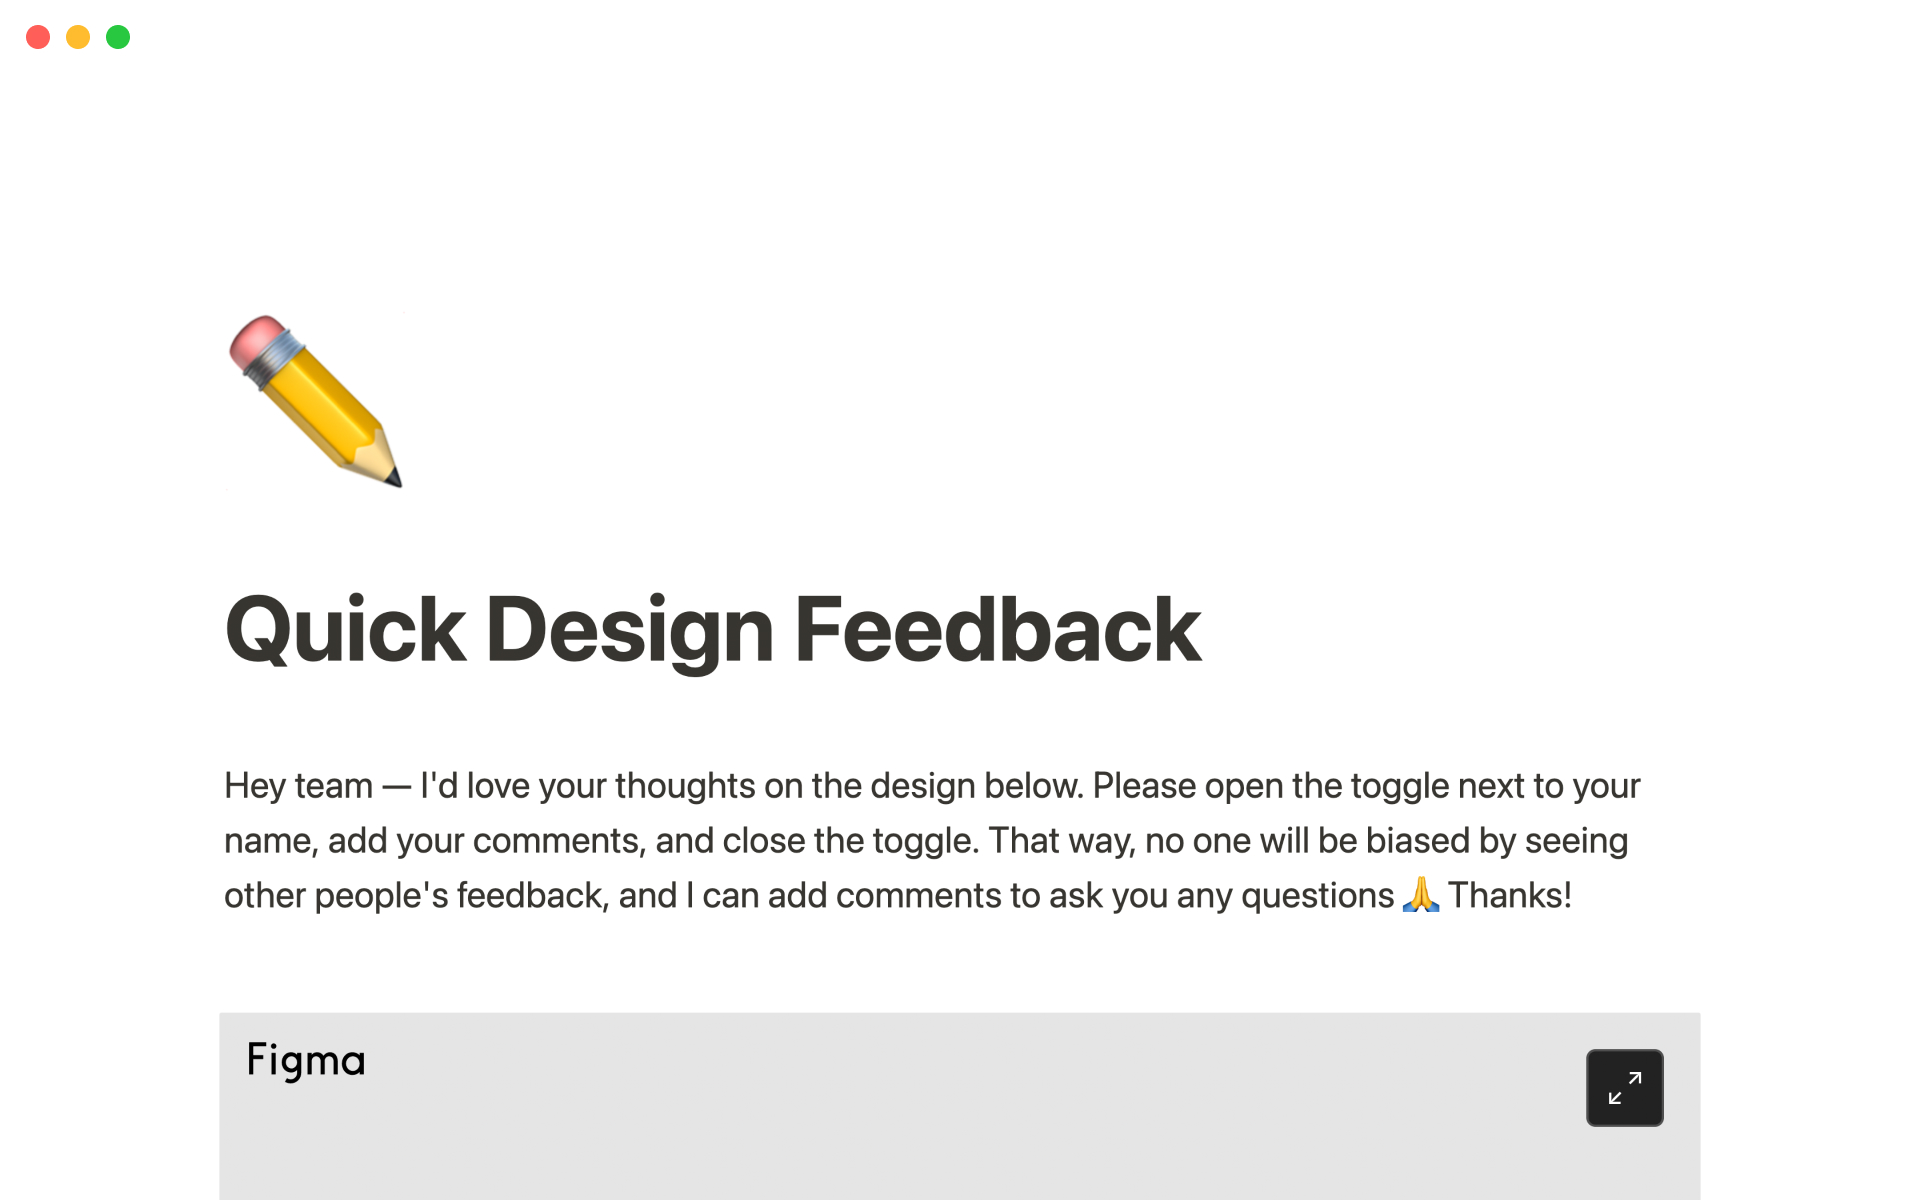 The desktop image for the Quick design feedback template